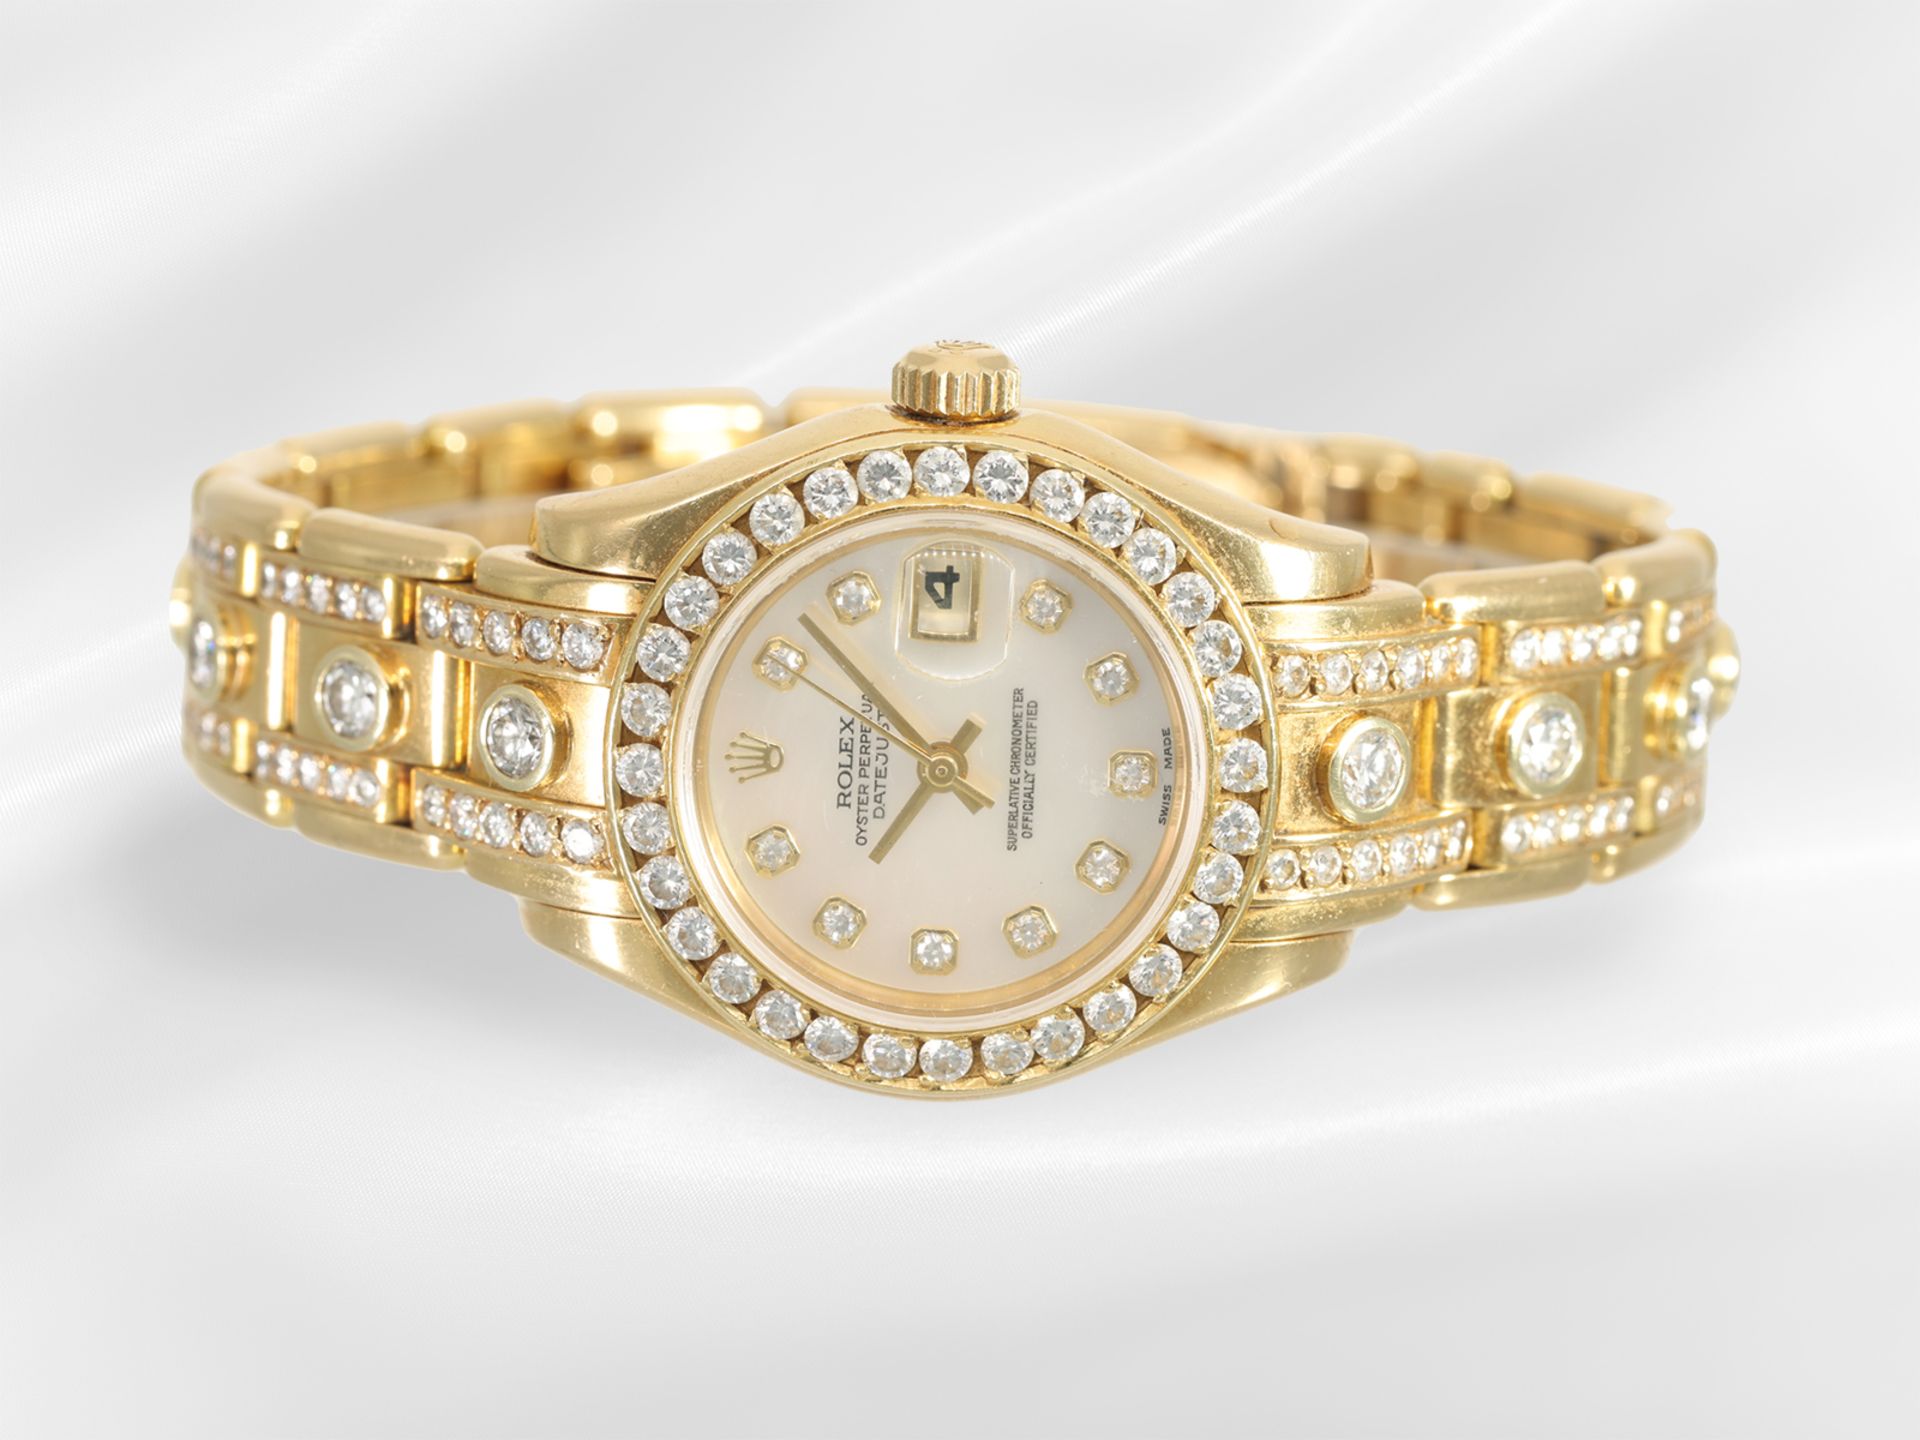 Wristwatch: wanted luxury ladies' watch Rolex Pearlmaster Ref.....with full brilliant-cut diamonds a